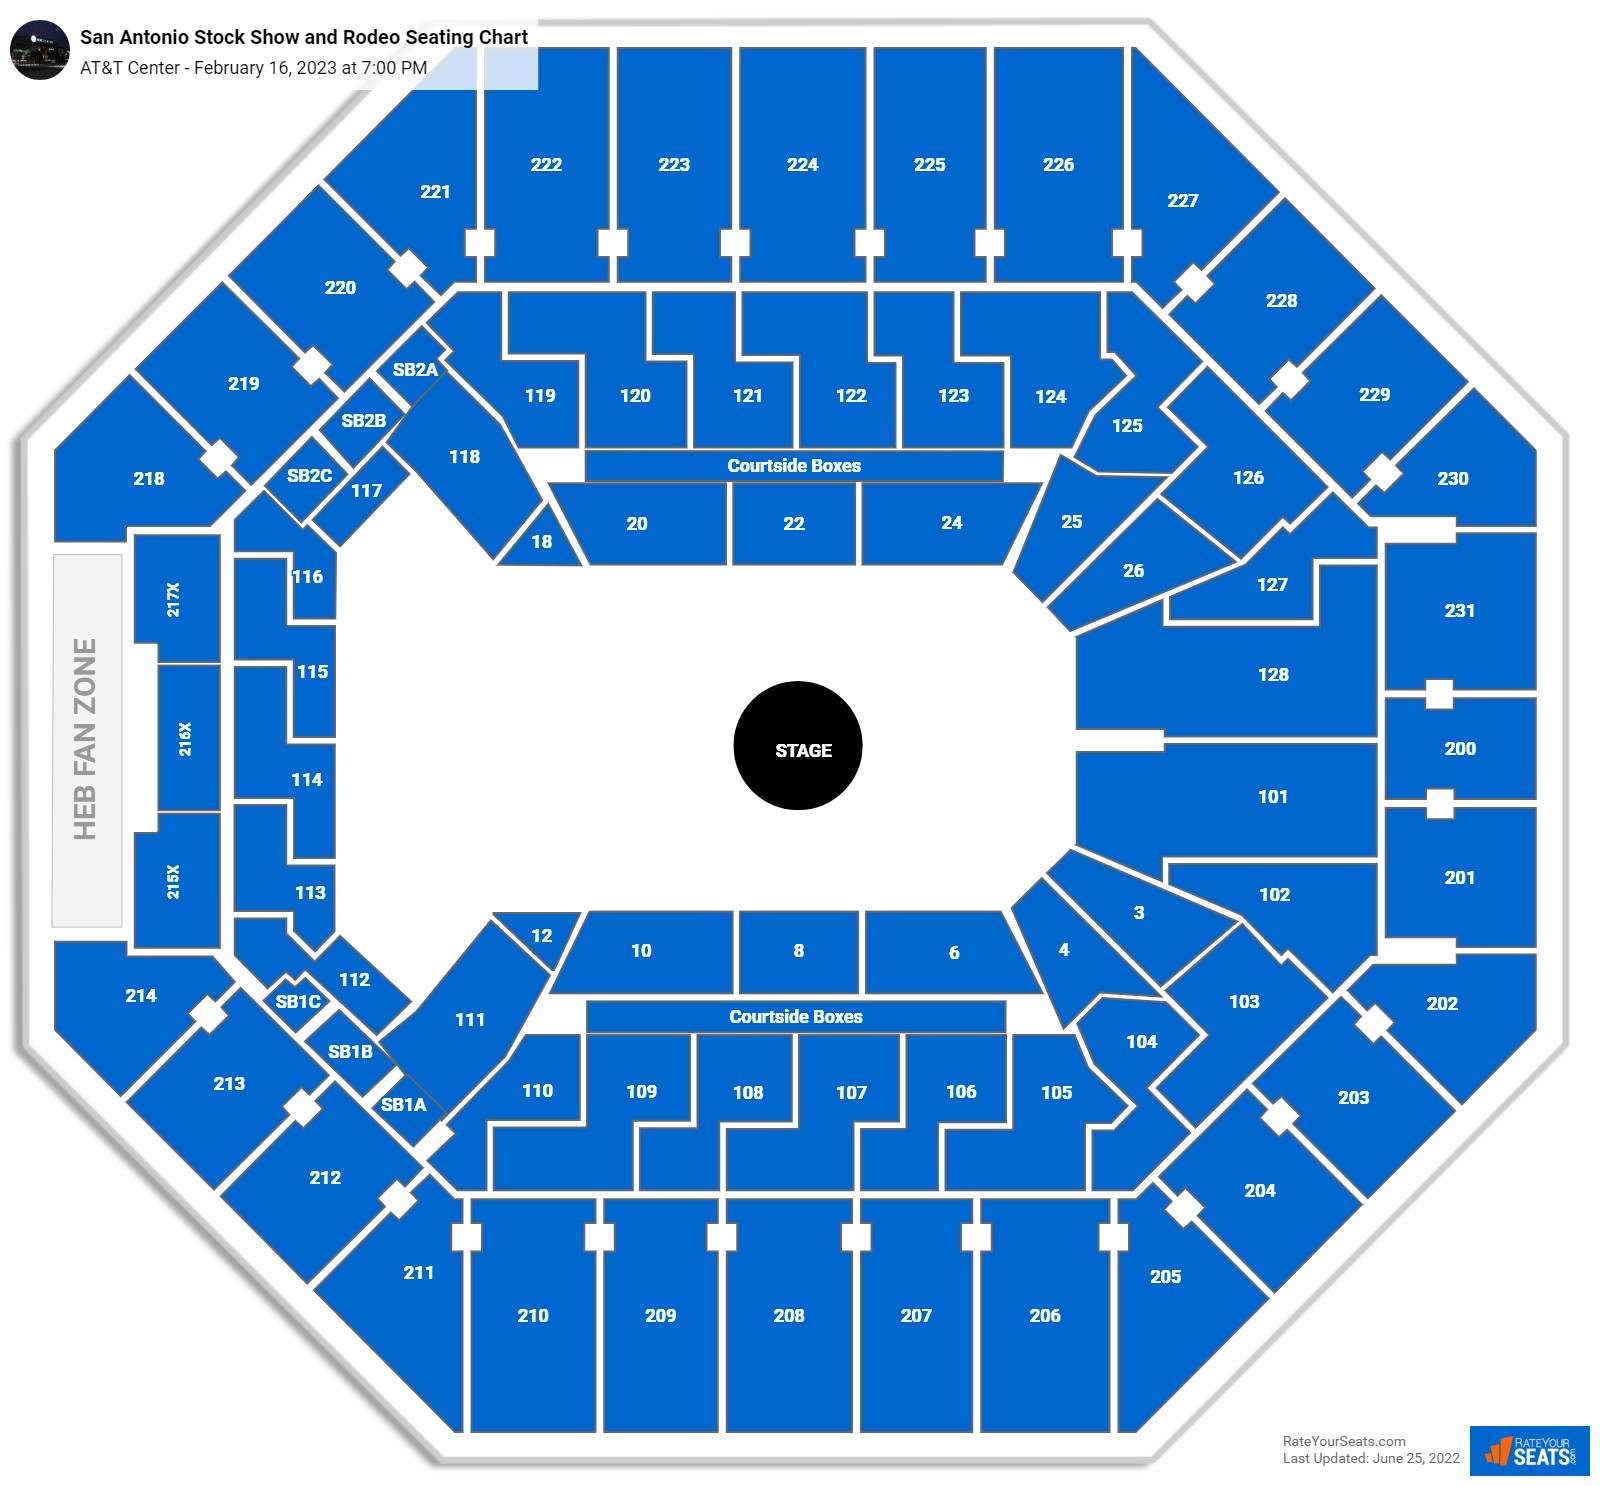 AT&T Center Concert Seating Chart